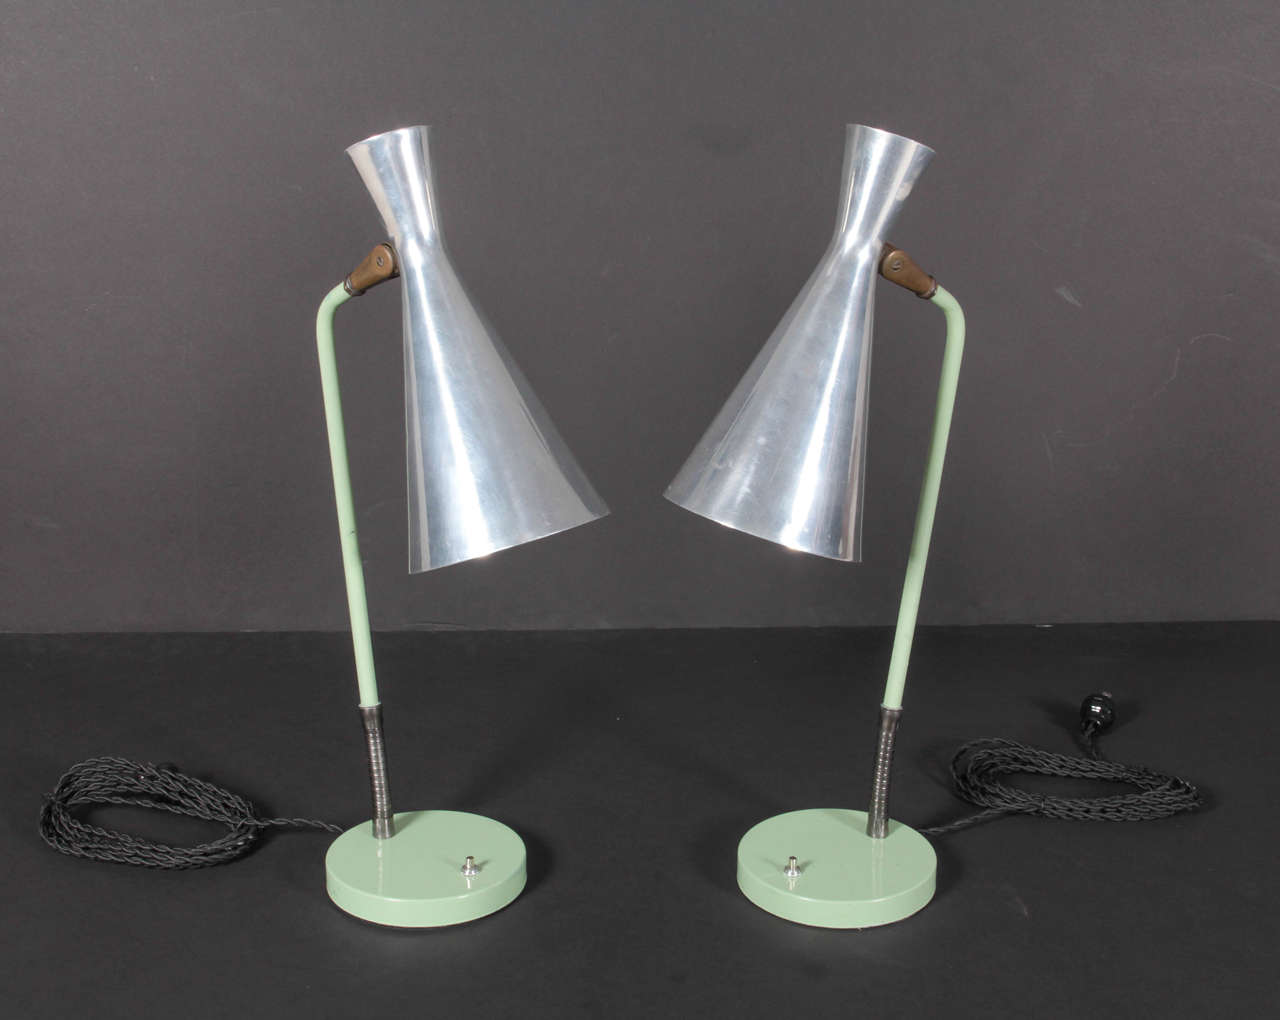 Green-painted steel bases with a flexible brass stem supports a polished aluminum double-cone shade. Newly rewired for US usage and fitted with LED bulbs. A slight dent to top of one shade, minor scratching to polished shades and original paint.